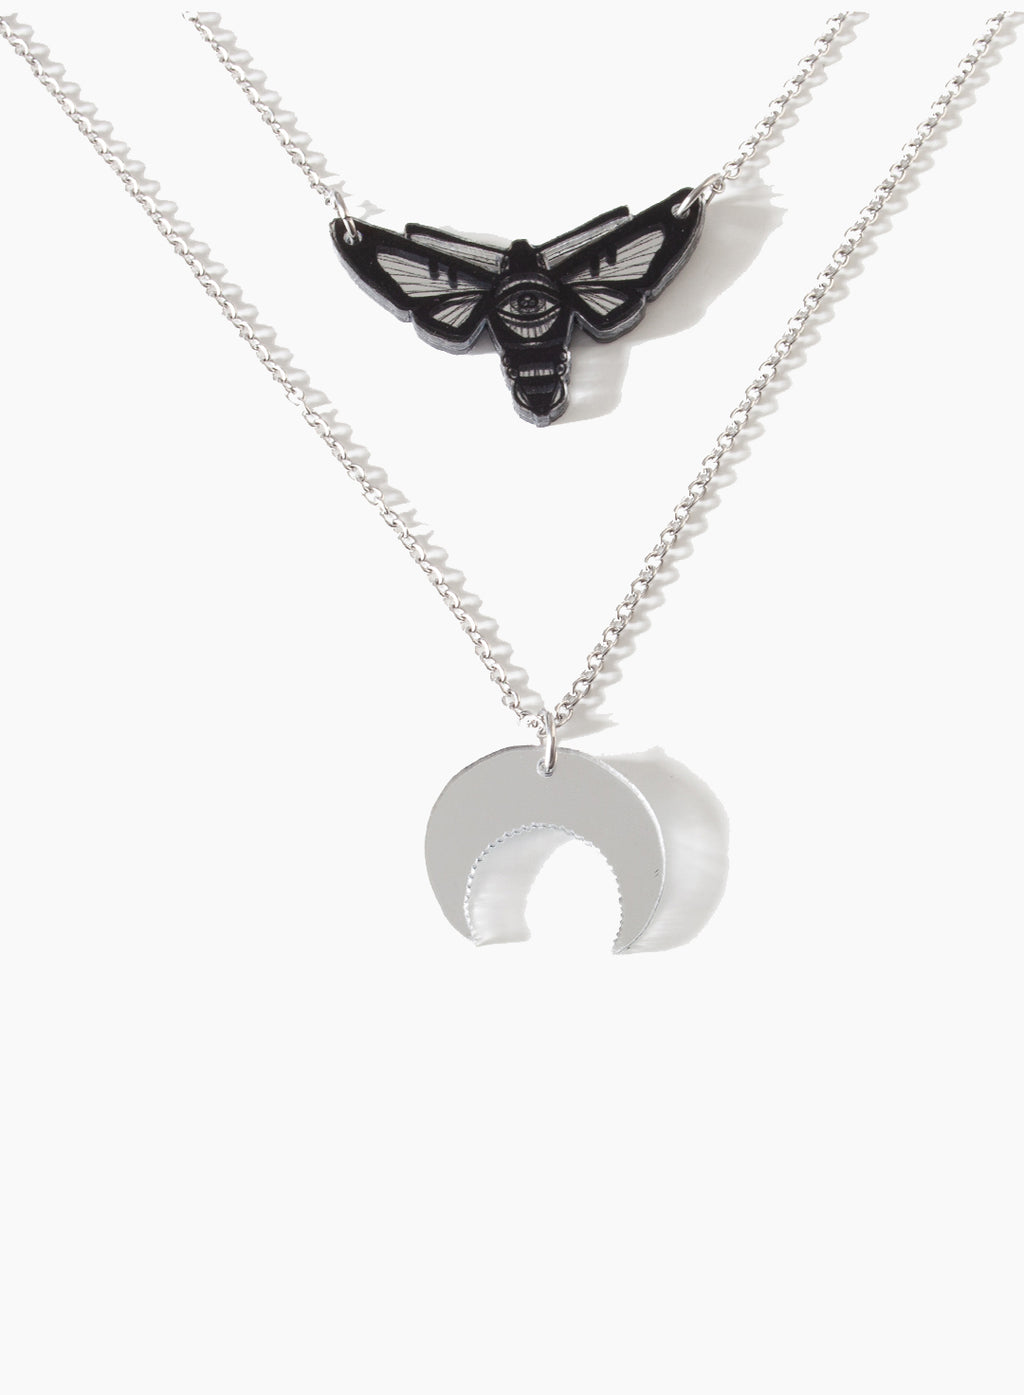 Mineatures Hawkmoth Charm Necklace, Double Sided Mirror